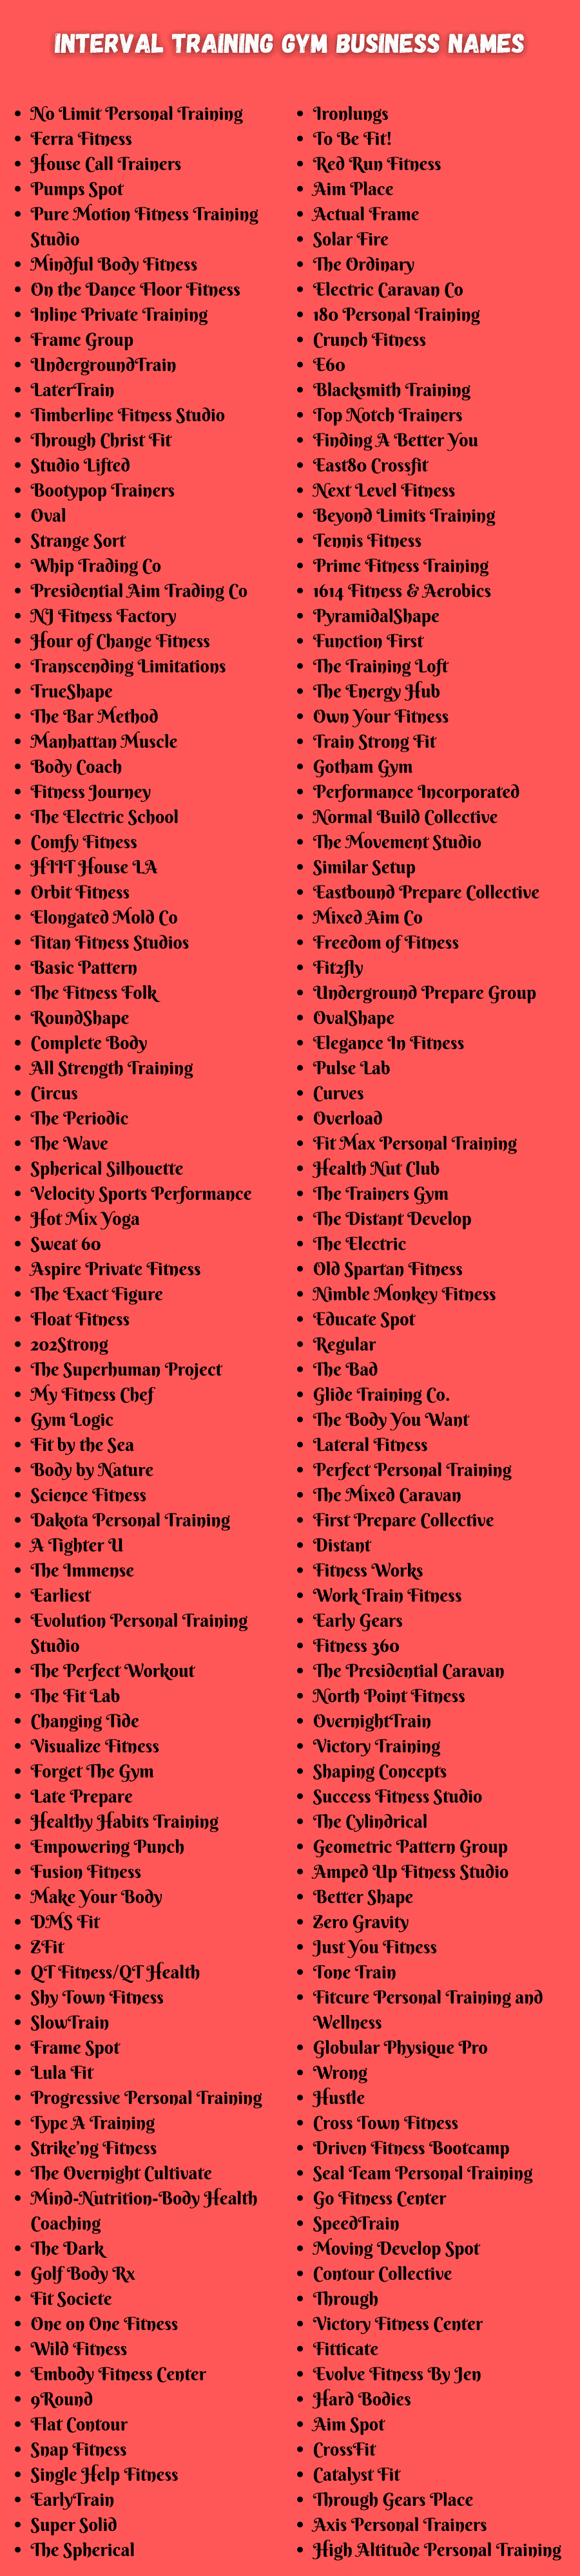 Interval Training Gym Business Names